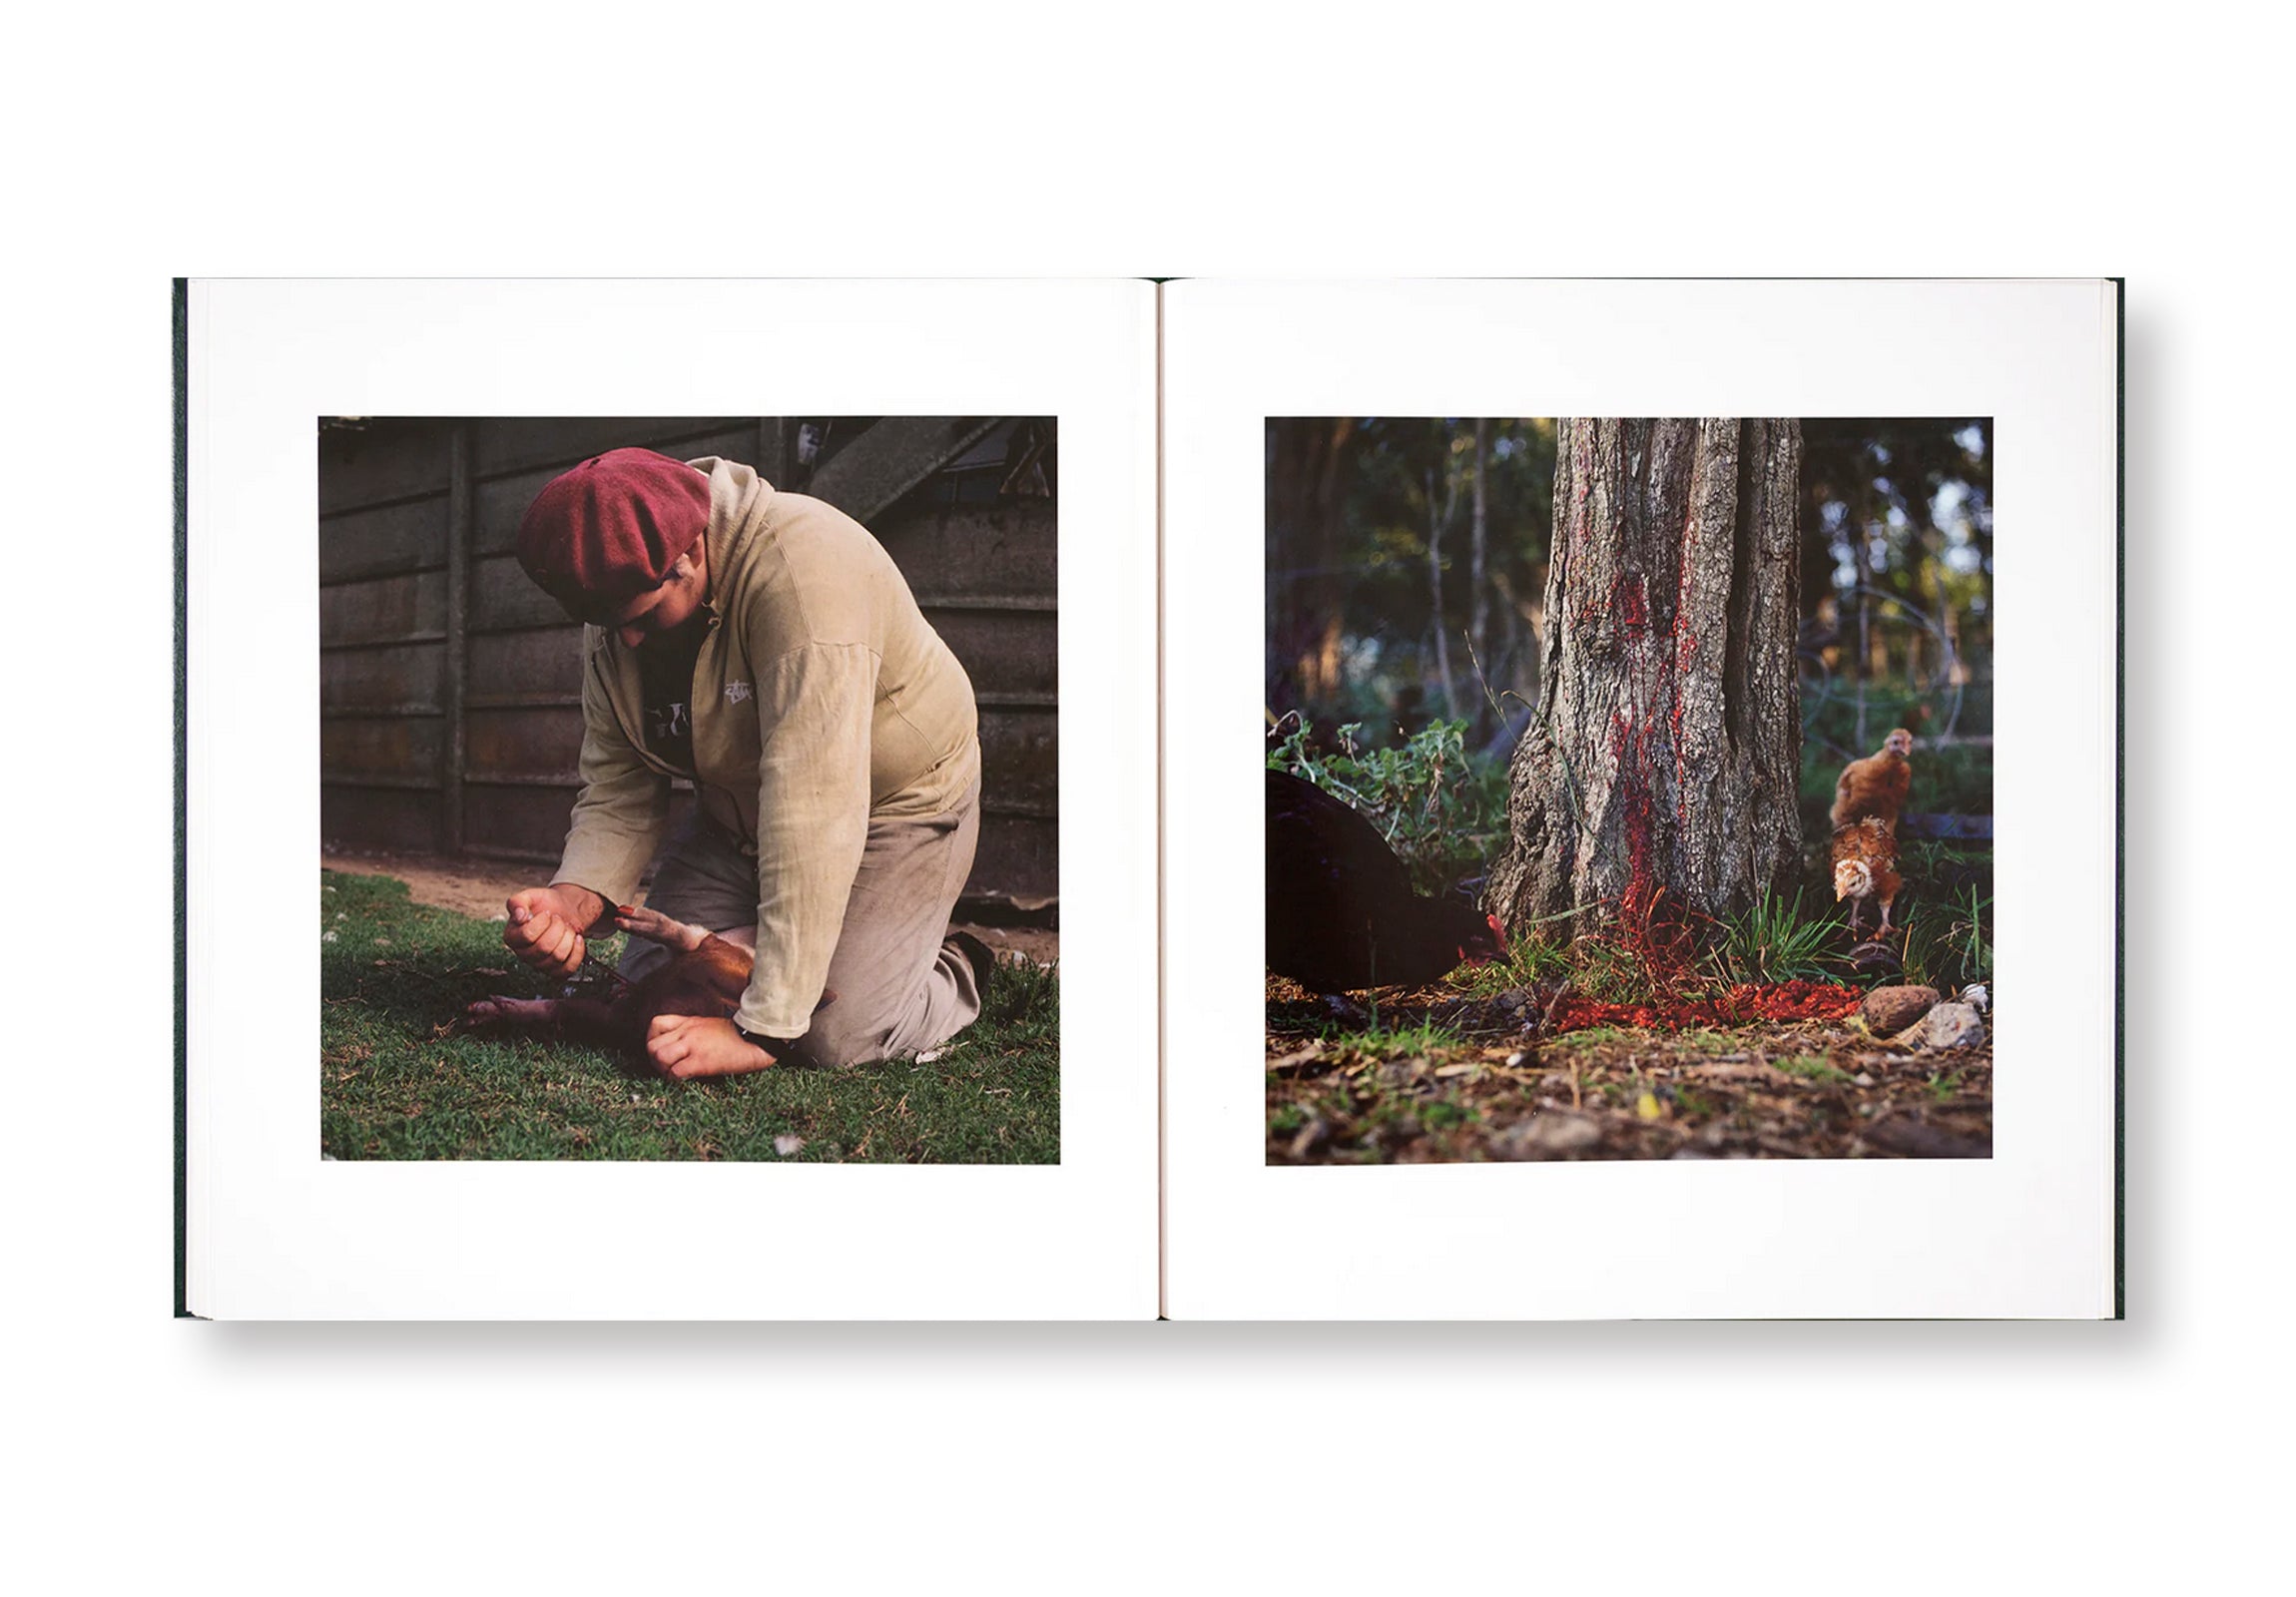 ON THE SIXTH DAY by Alessandra Sanguinetti  [SIGNED]